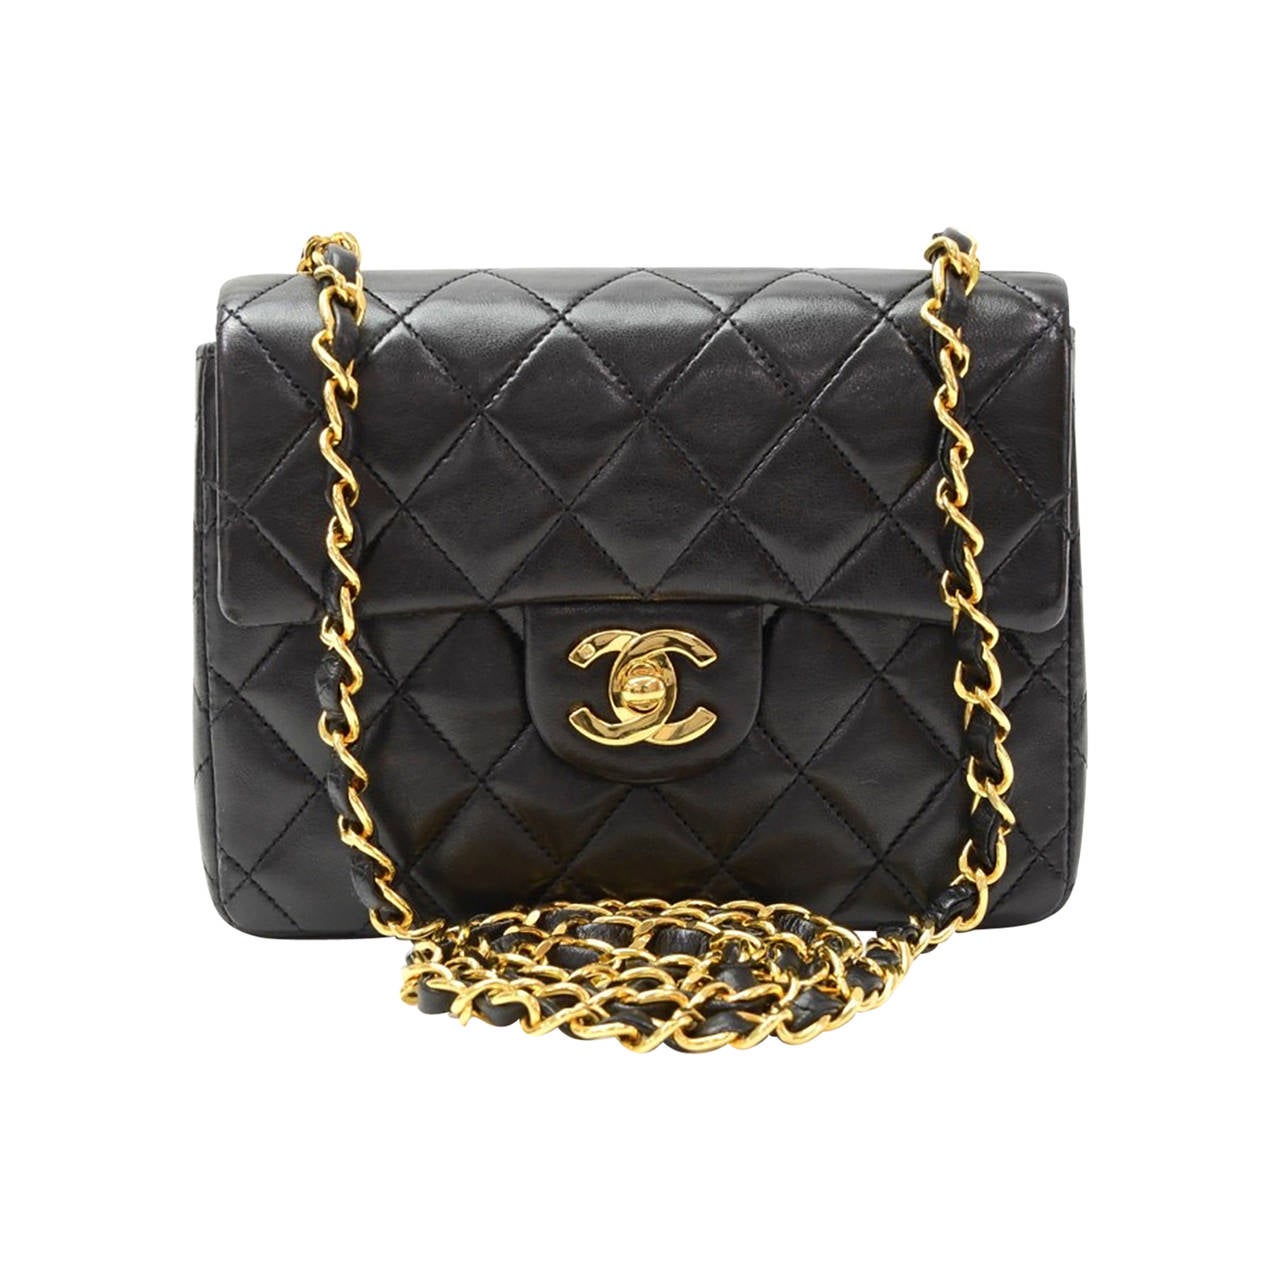 1990s Chanel Black Quilted Leather Mini Flap Bag